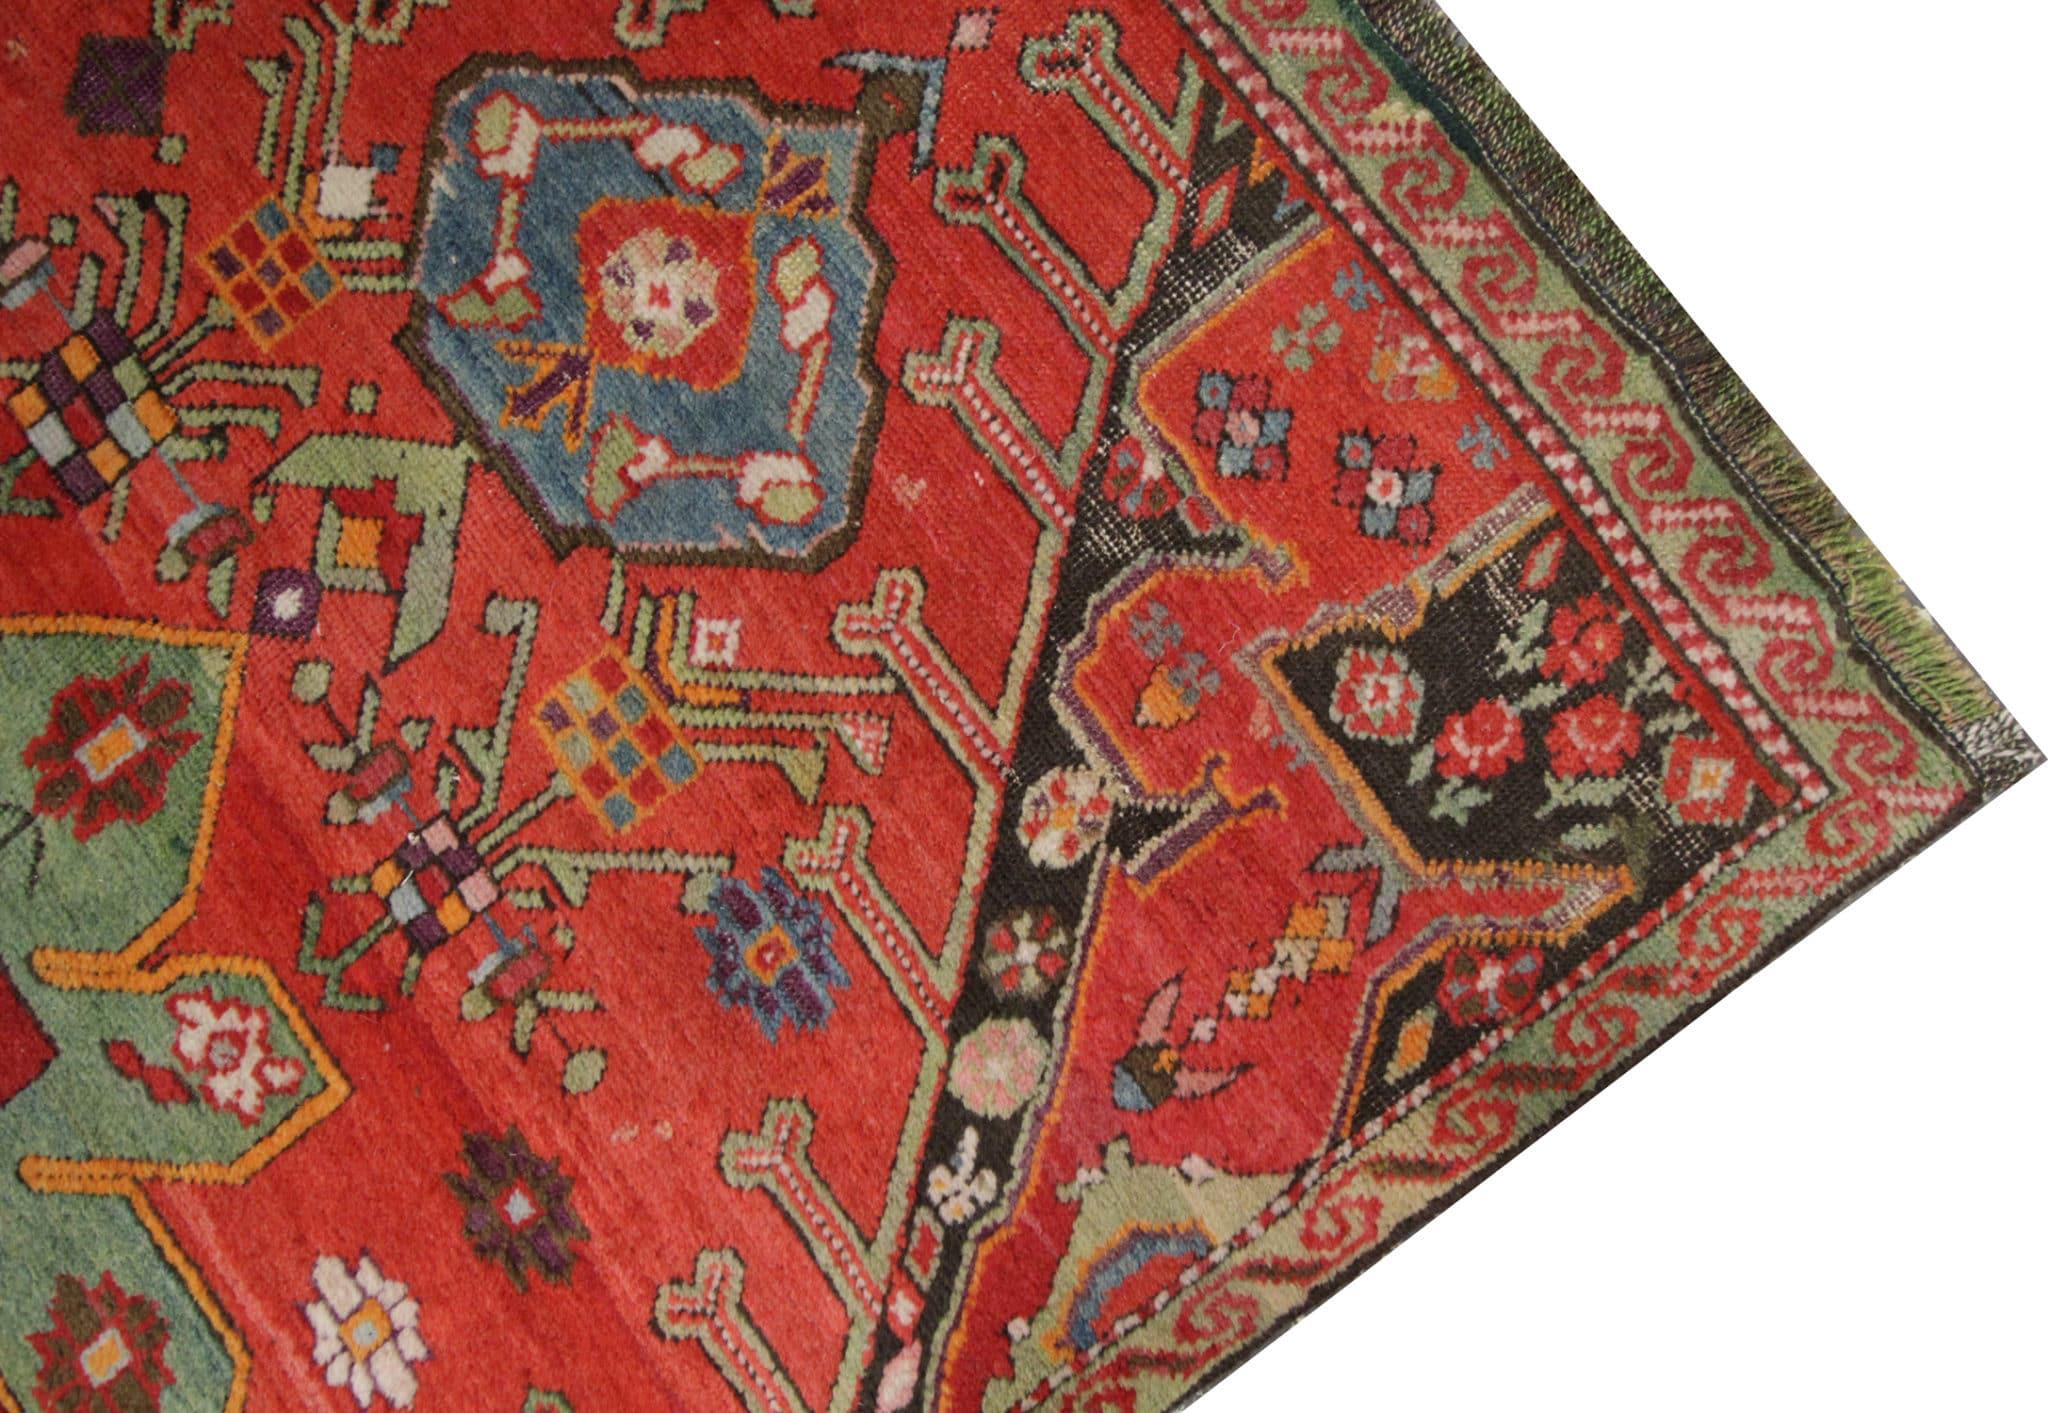 This antique runner rug originates from the Caucasus region, specifically Karabagh, Azerbaijan, dating back to the 1880s, making it a true relic of history. Hand-knotted with meticulous care, this piece boasts a traditional design with a central